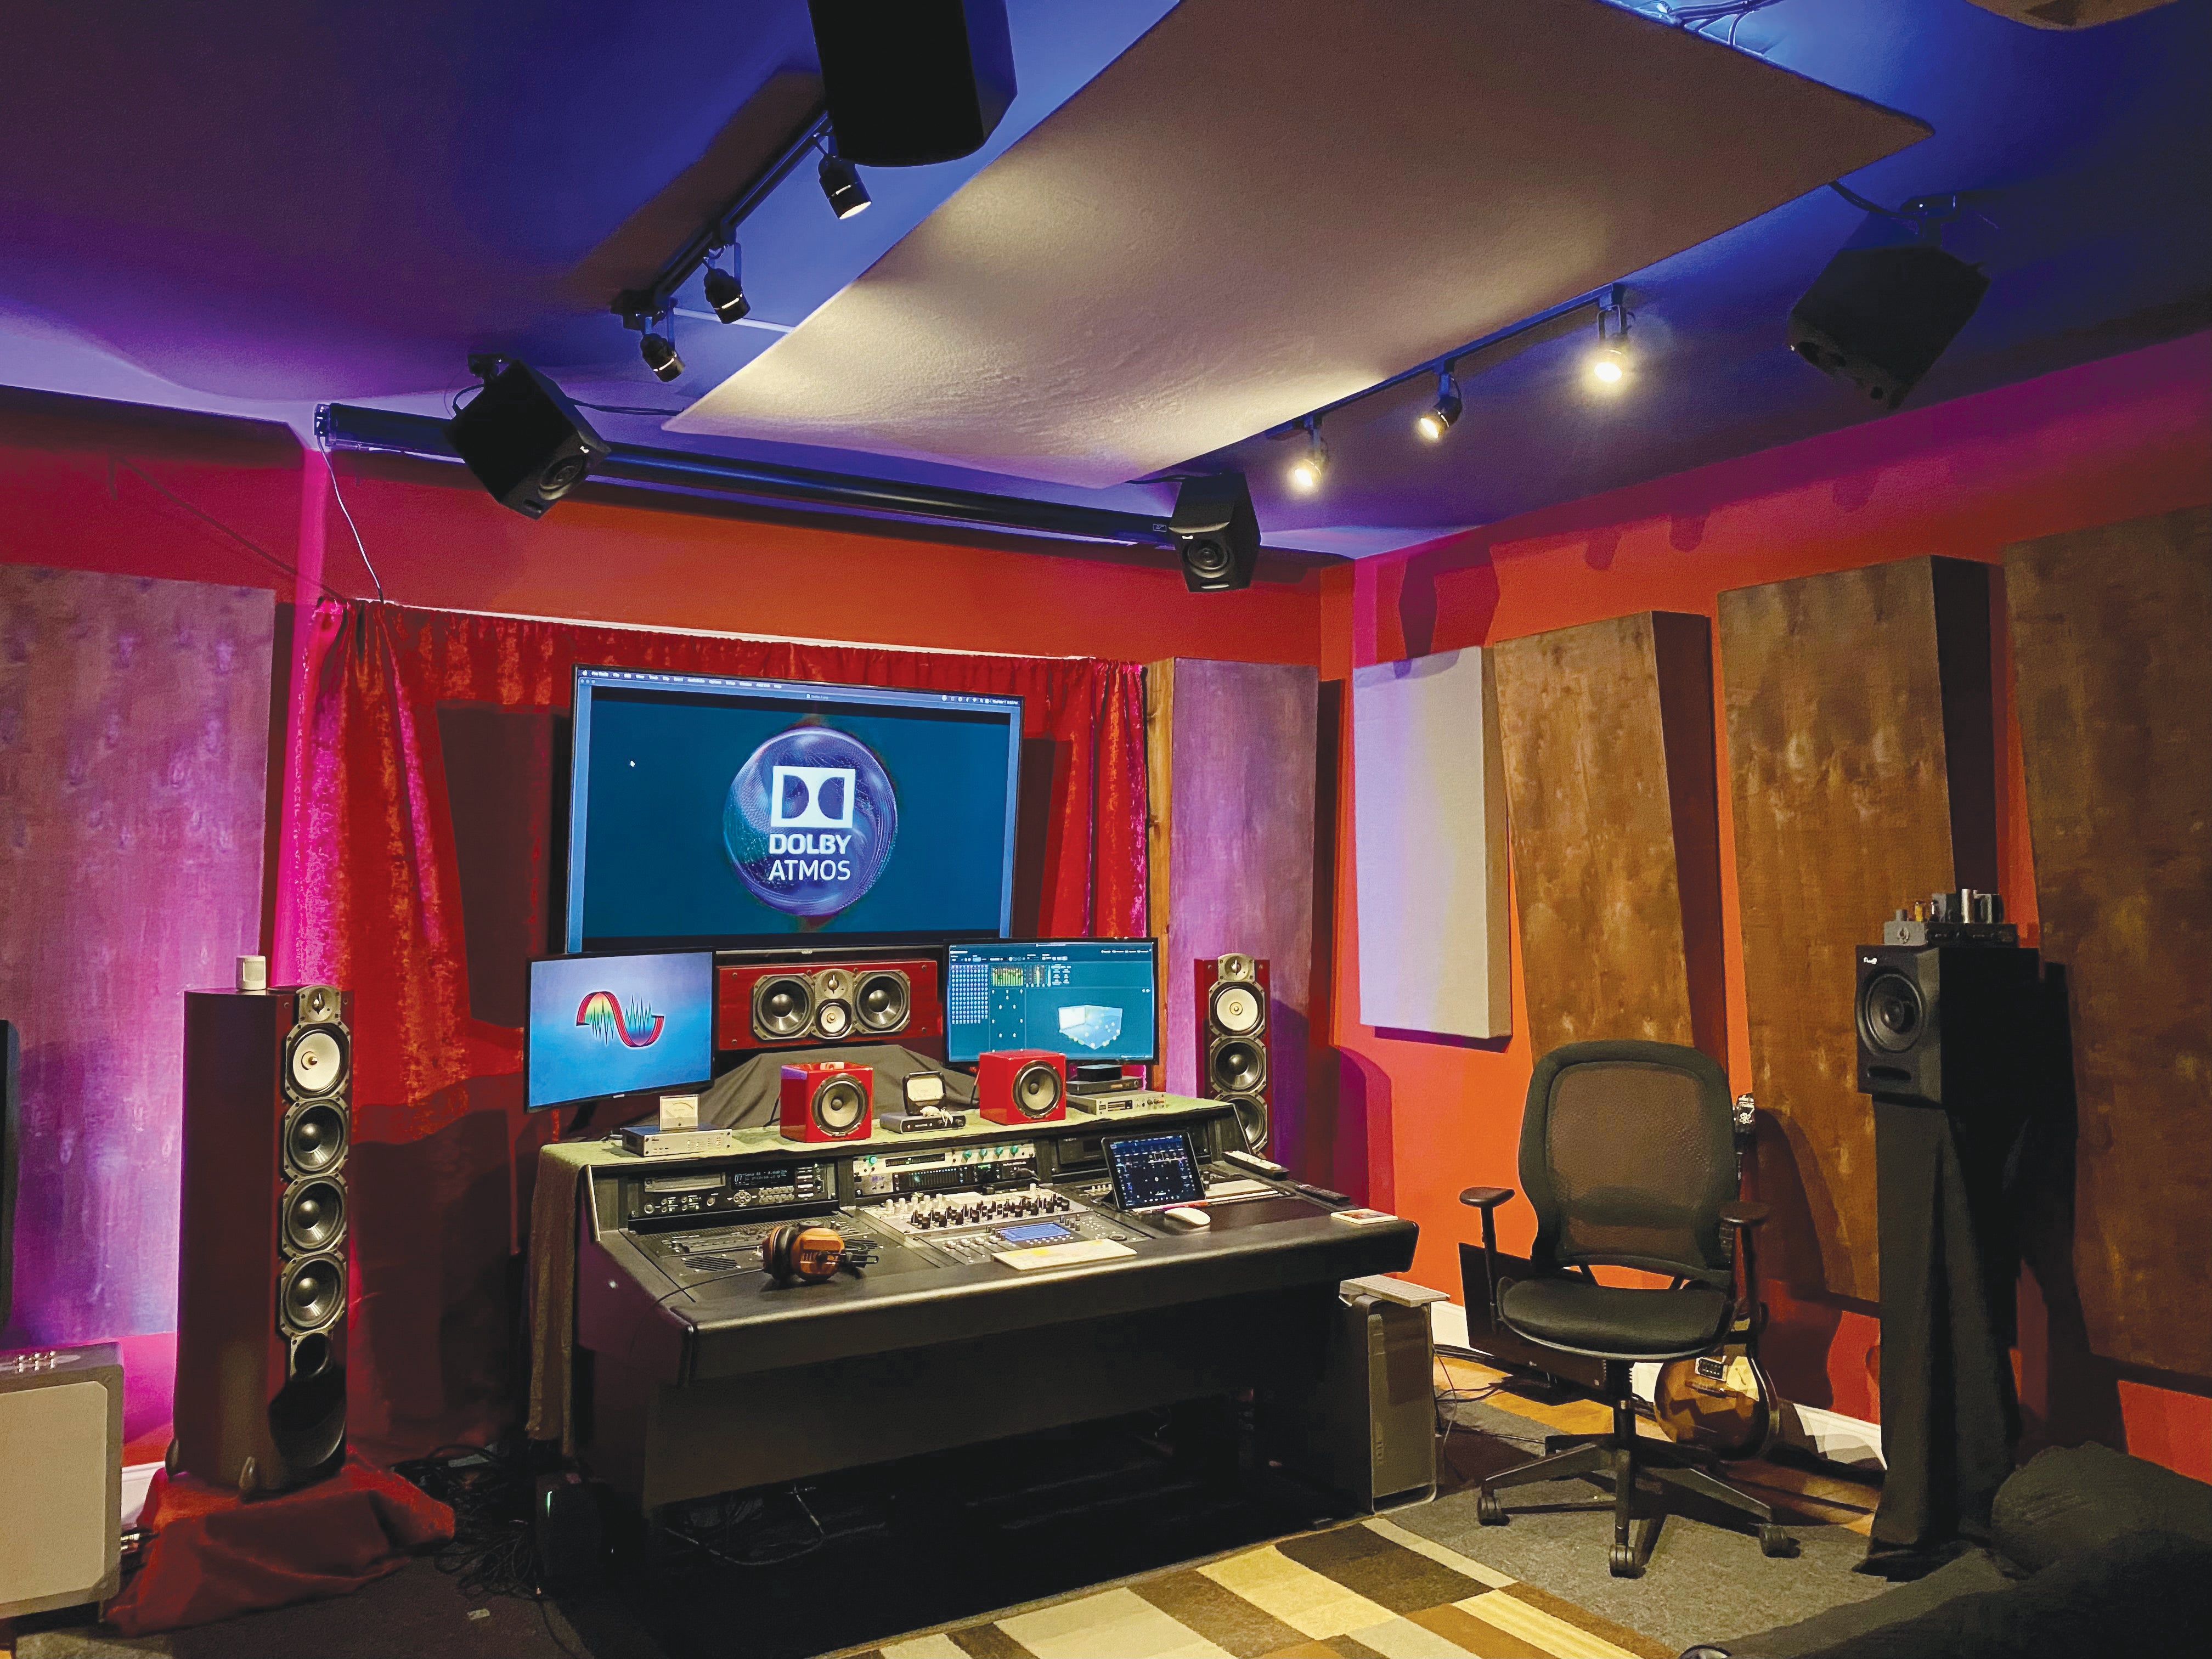 Taproot Audio Design celebrates over two decades of sound engineering services in Oxford.